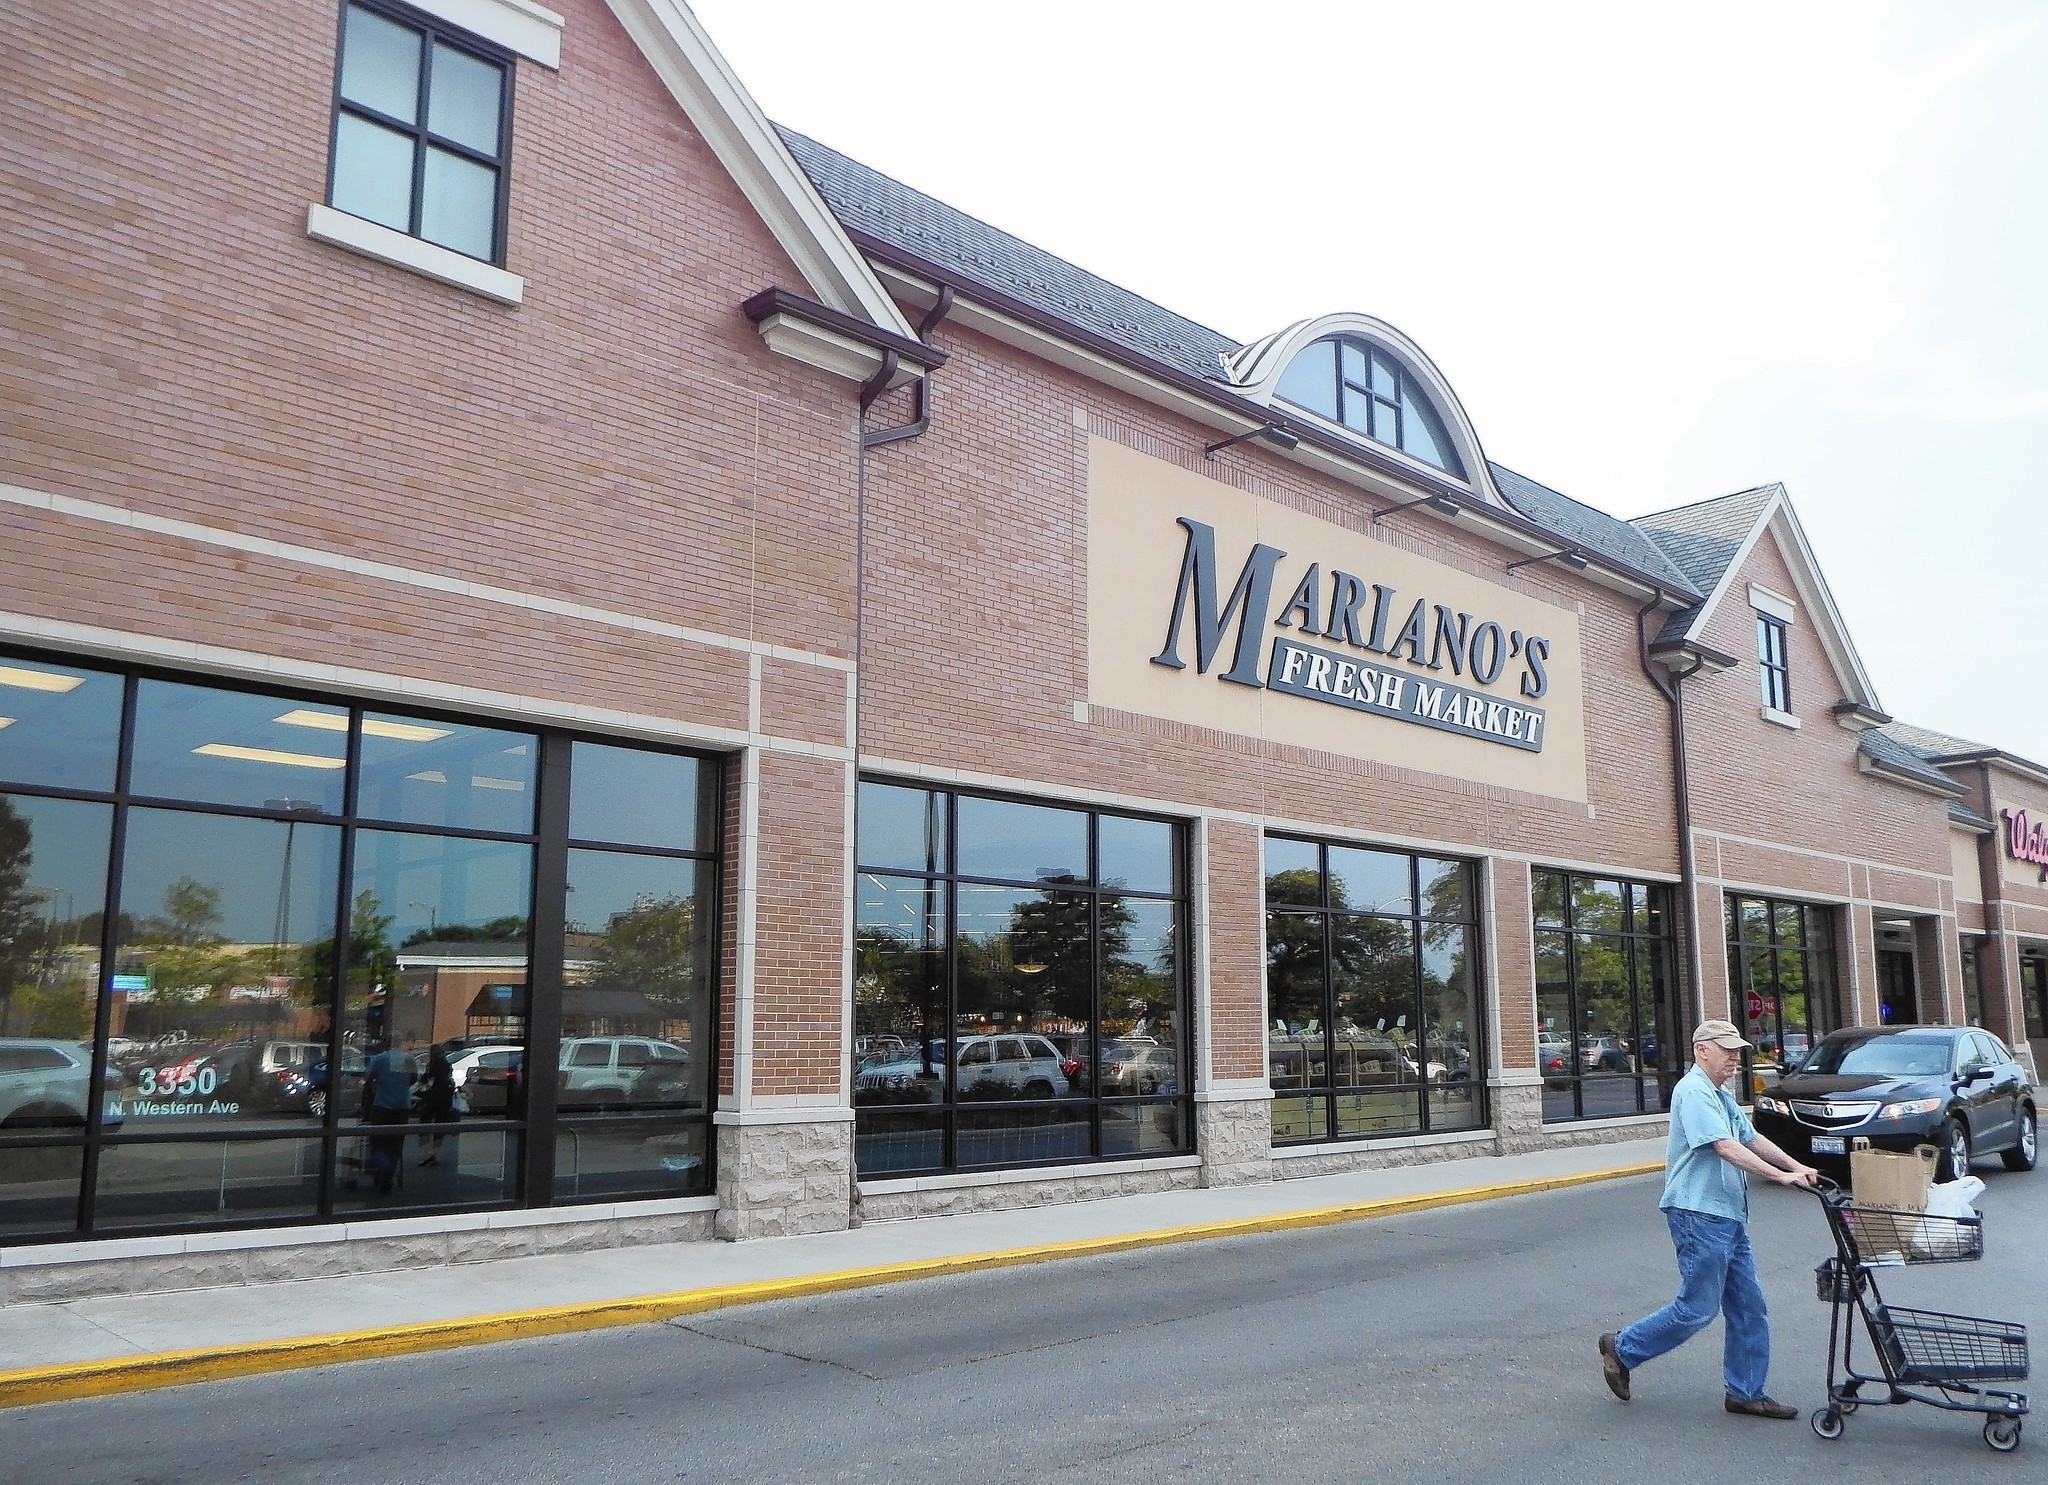 How can you apply to work at Mariano's Grocery?